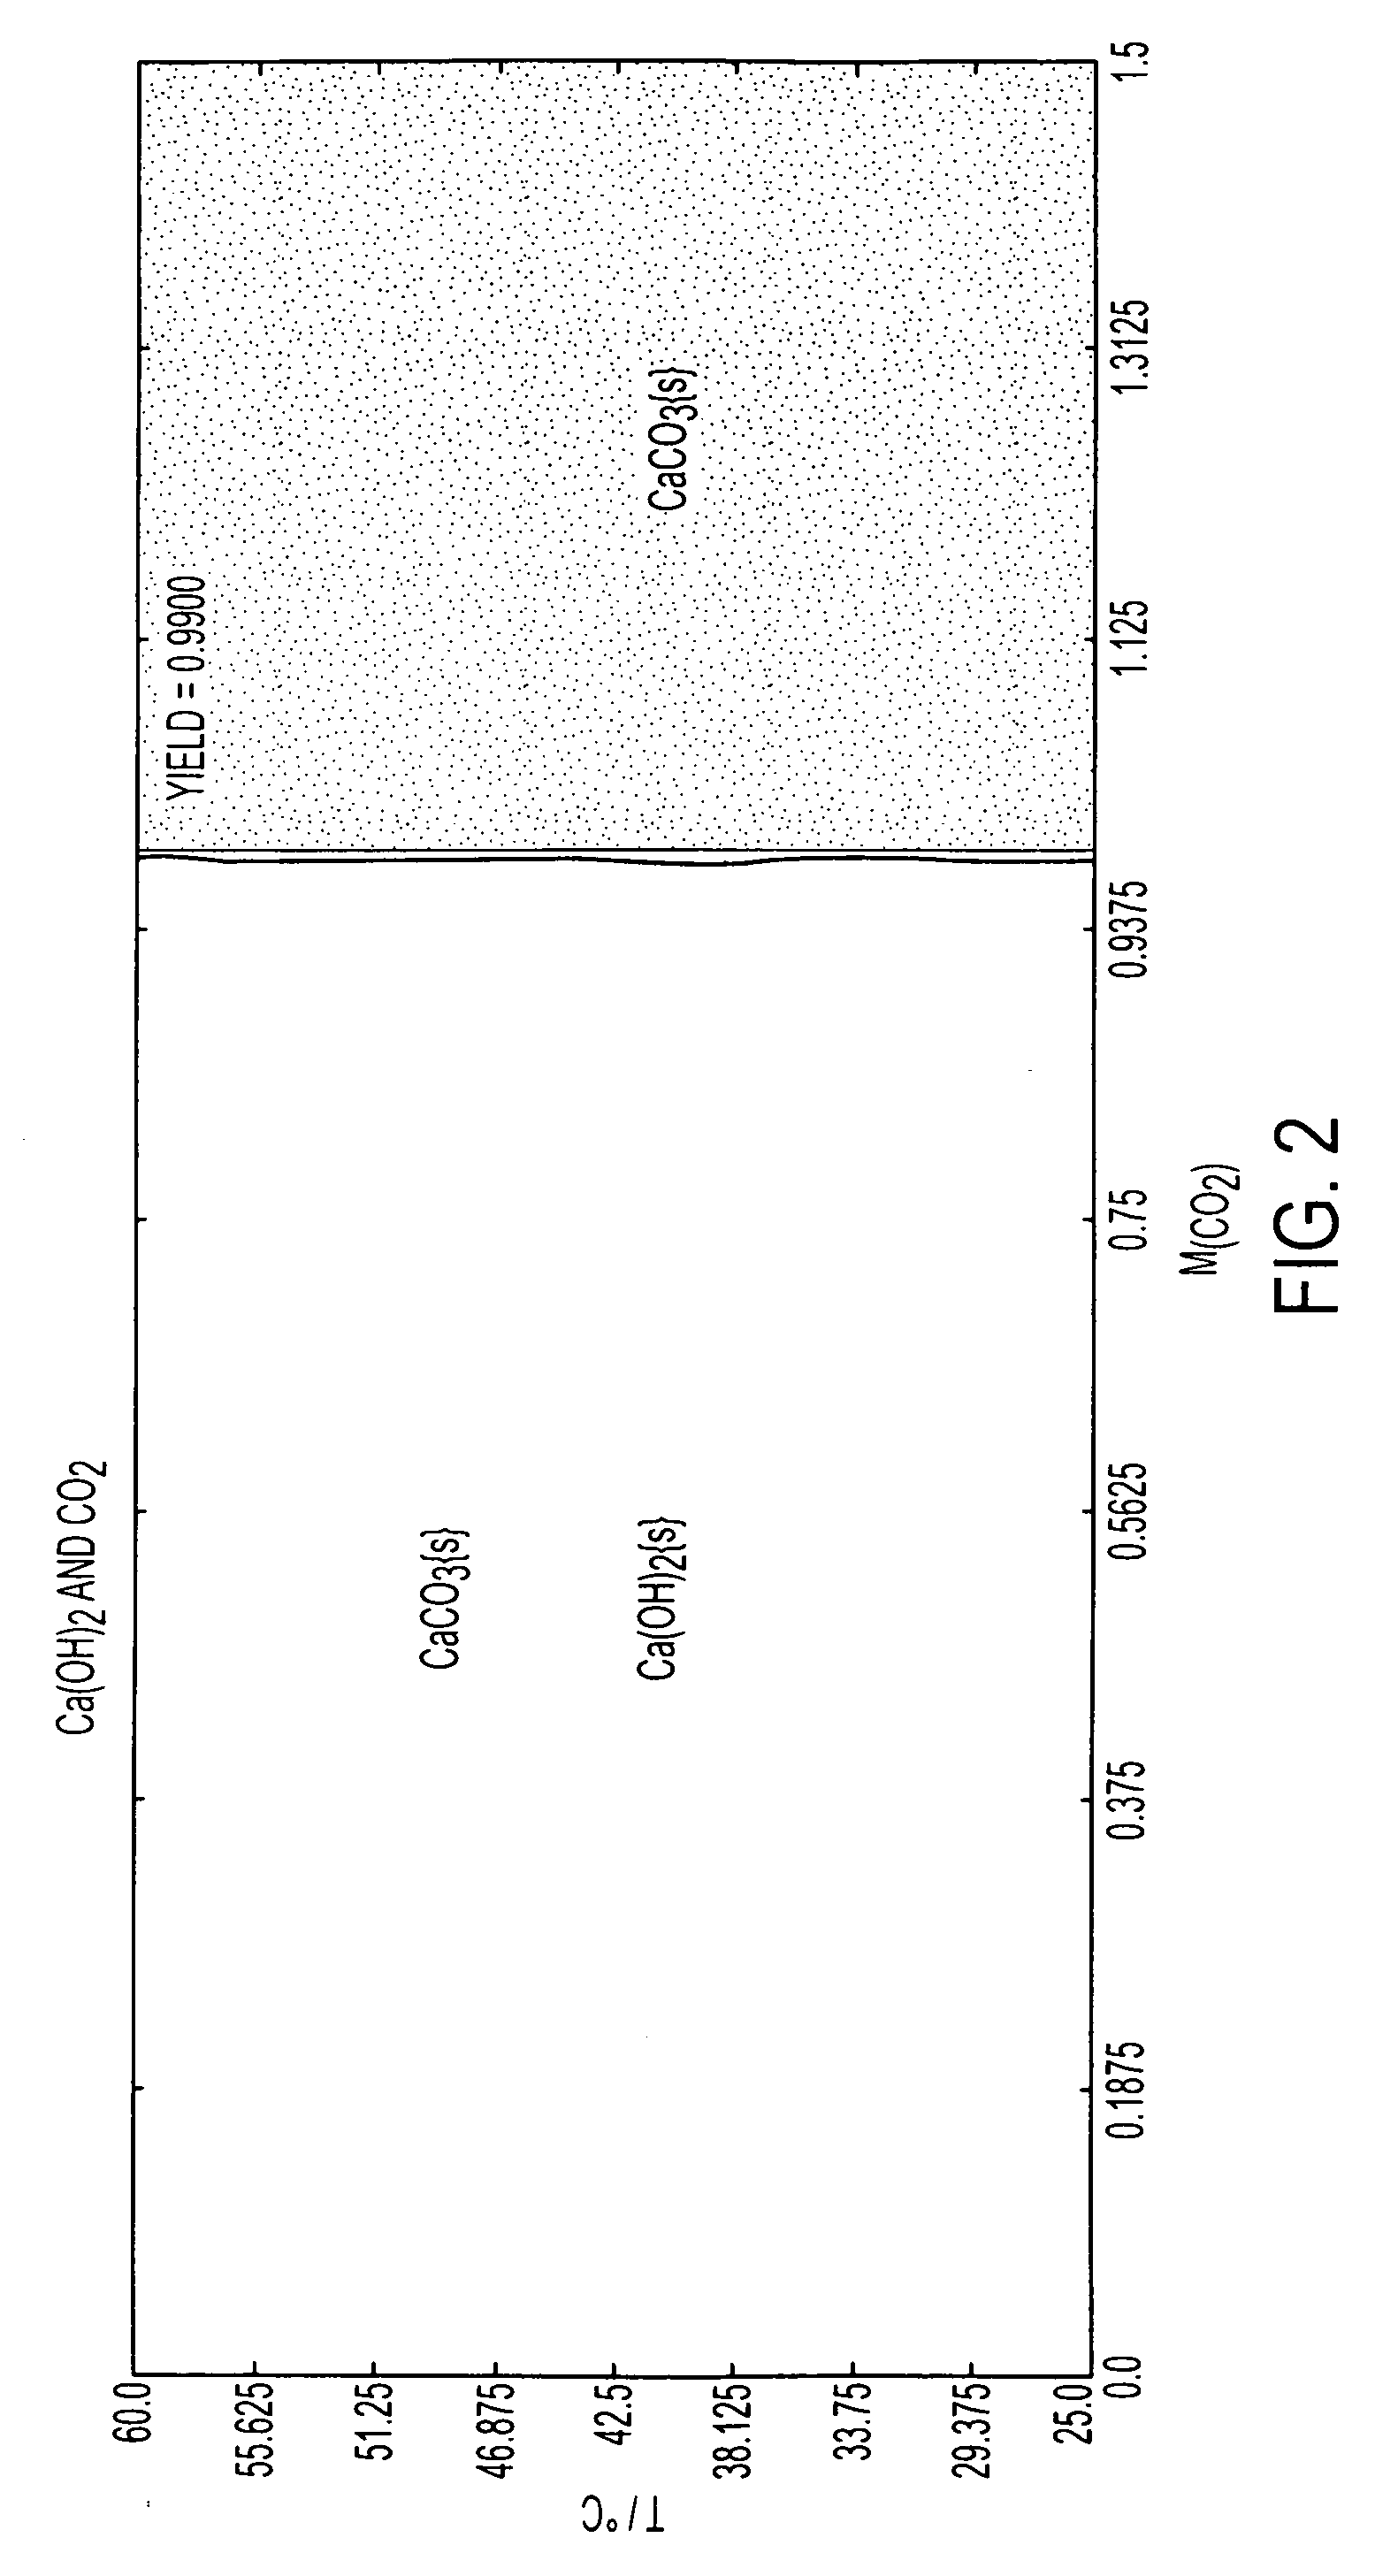 Systems and methods for carbon capture and sequestration and compositions derived therefrom